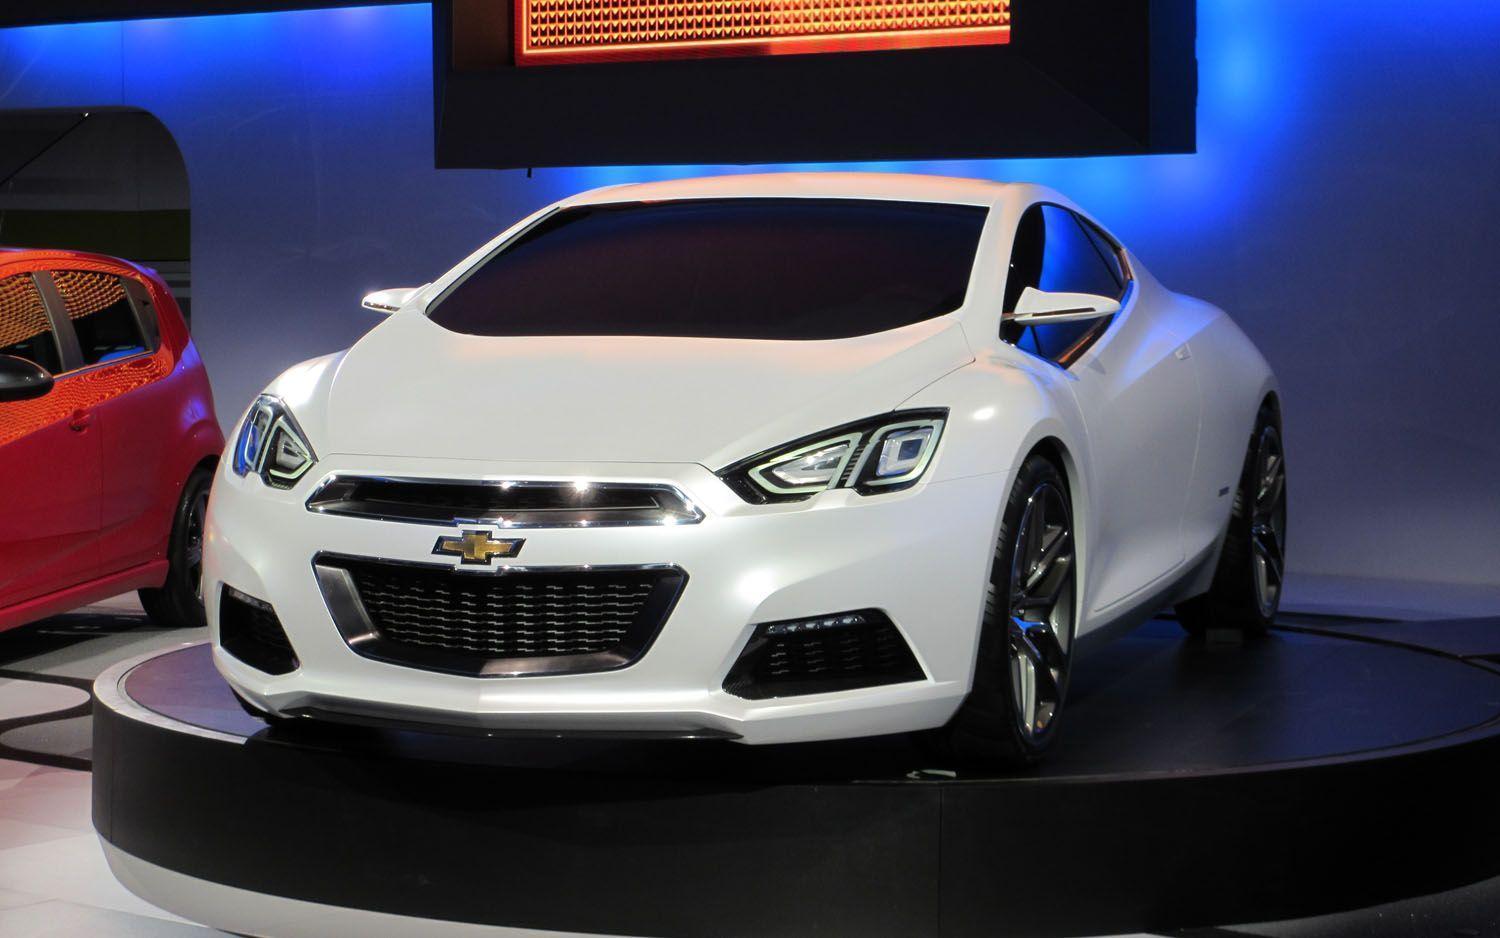 Chevy Cruze Coupe. Chevrolet Cruze Coupe 13512 HD Wallpaper